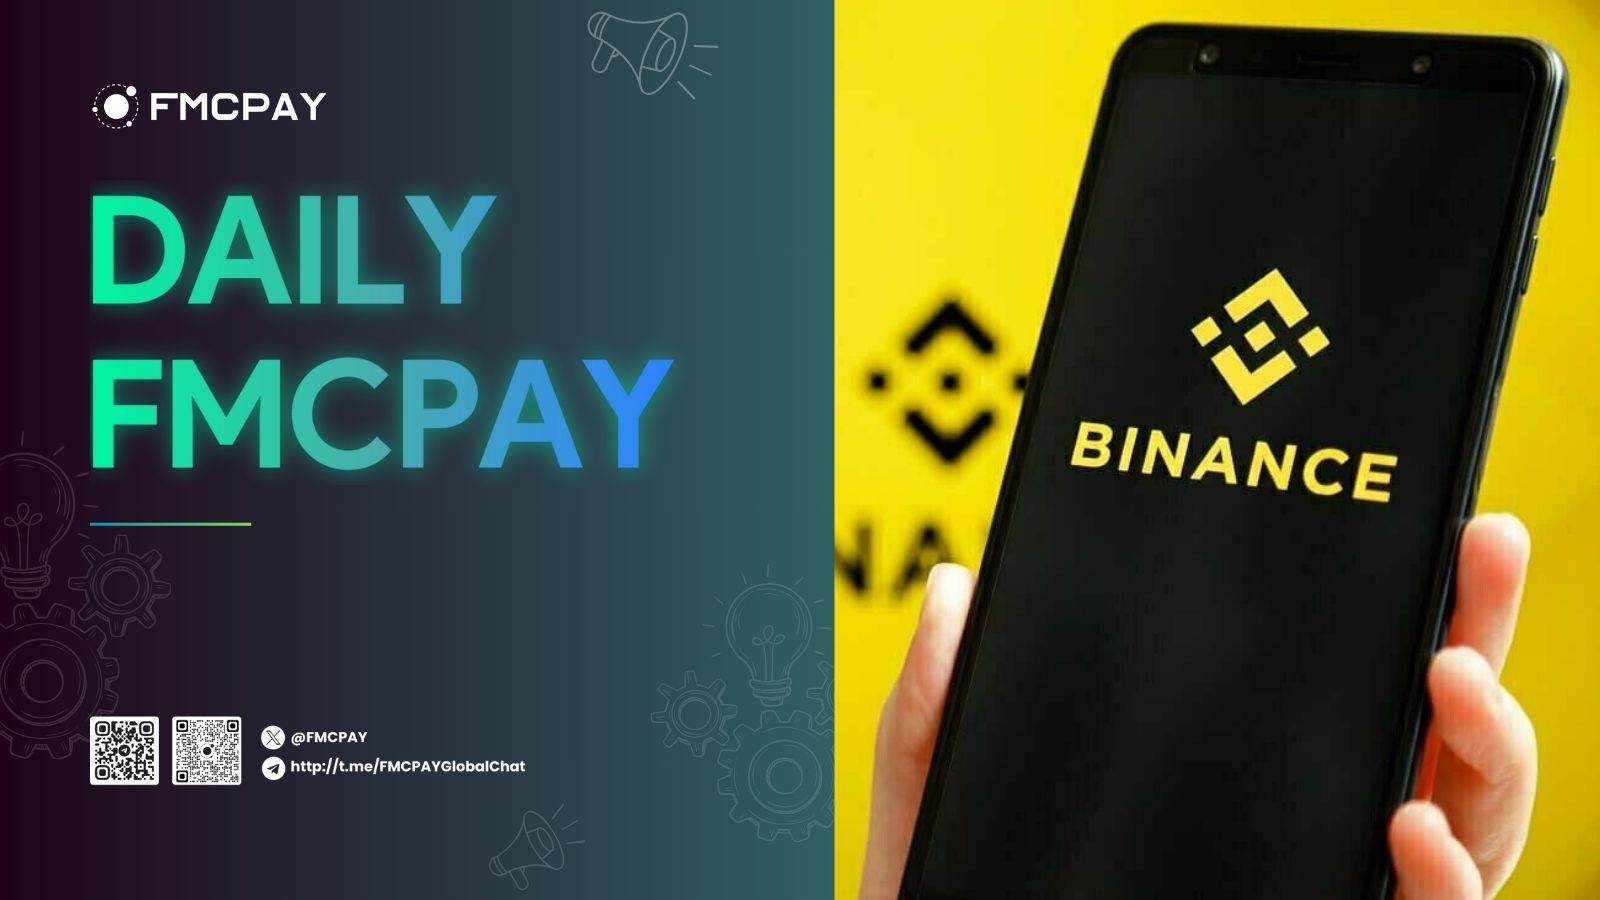 fmcpay binance claims code leak on github is outdated